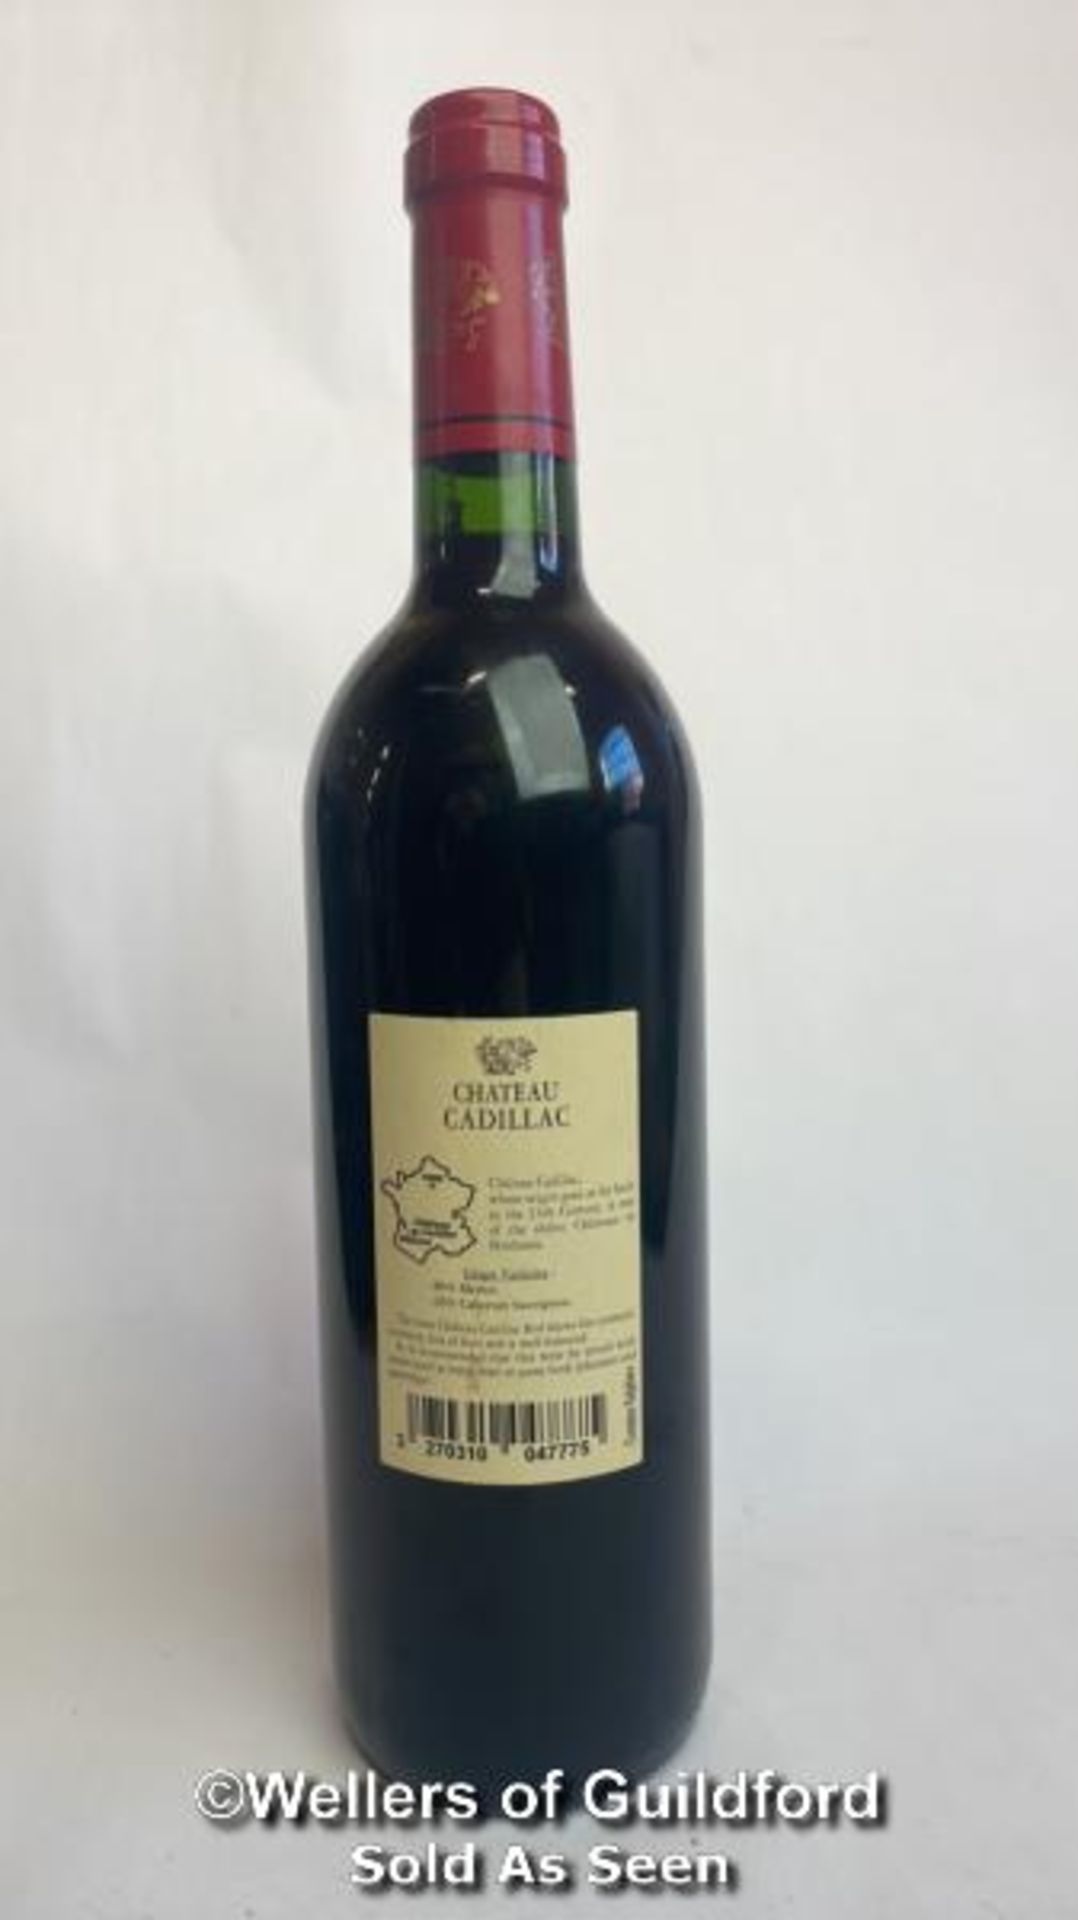 2003 Chateau Cadillac, Bordeaux Superieur, 75cl, 12% vol / Please see images for fill level and - Image 5 of 6